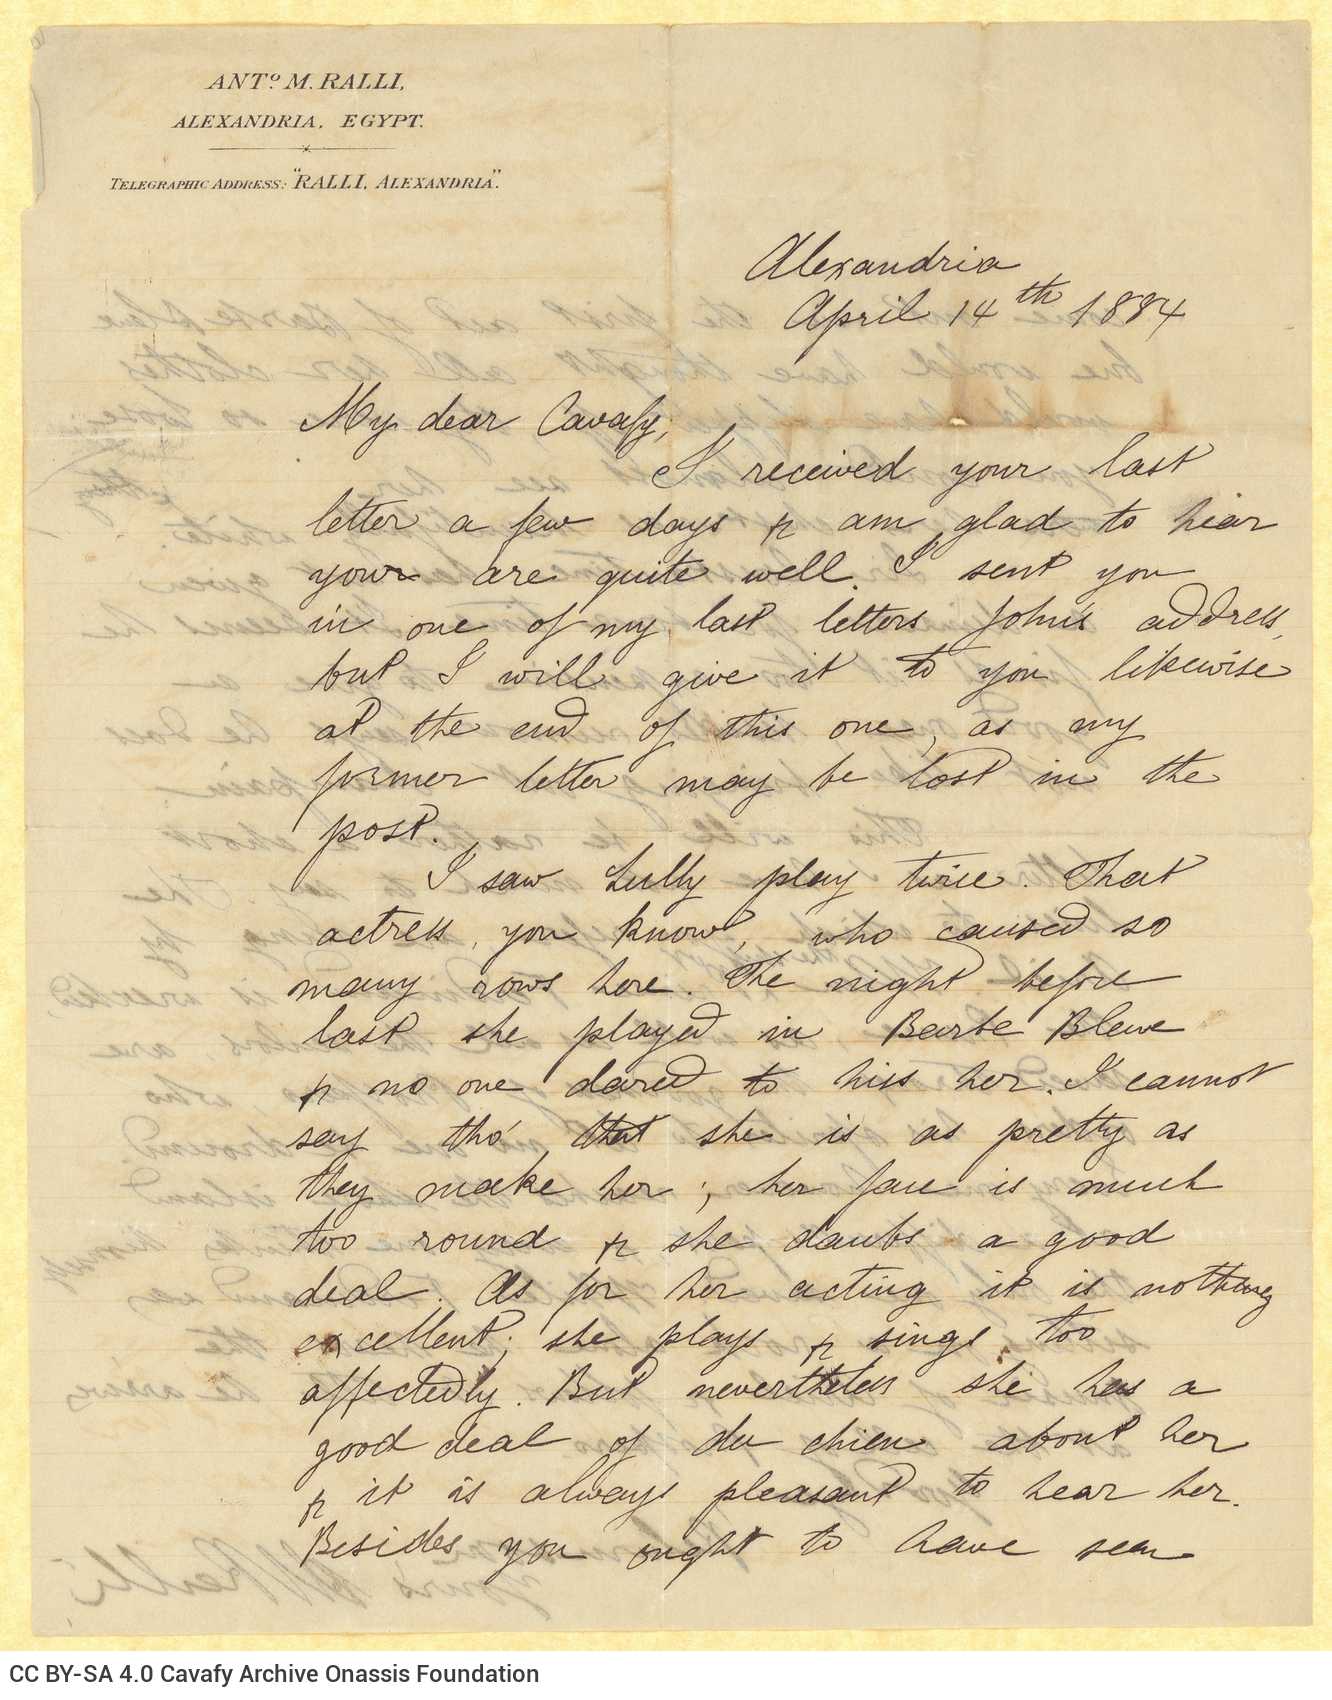 Handwritten letter by Mike Ralli to Cavafy on both sides of a sheet. Description of the work "La Barbe bleue" –possibly in 